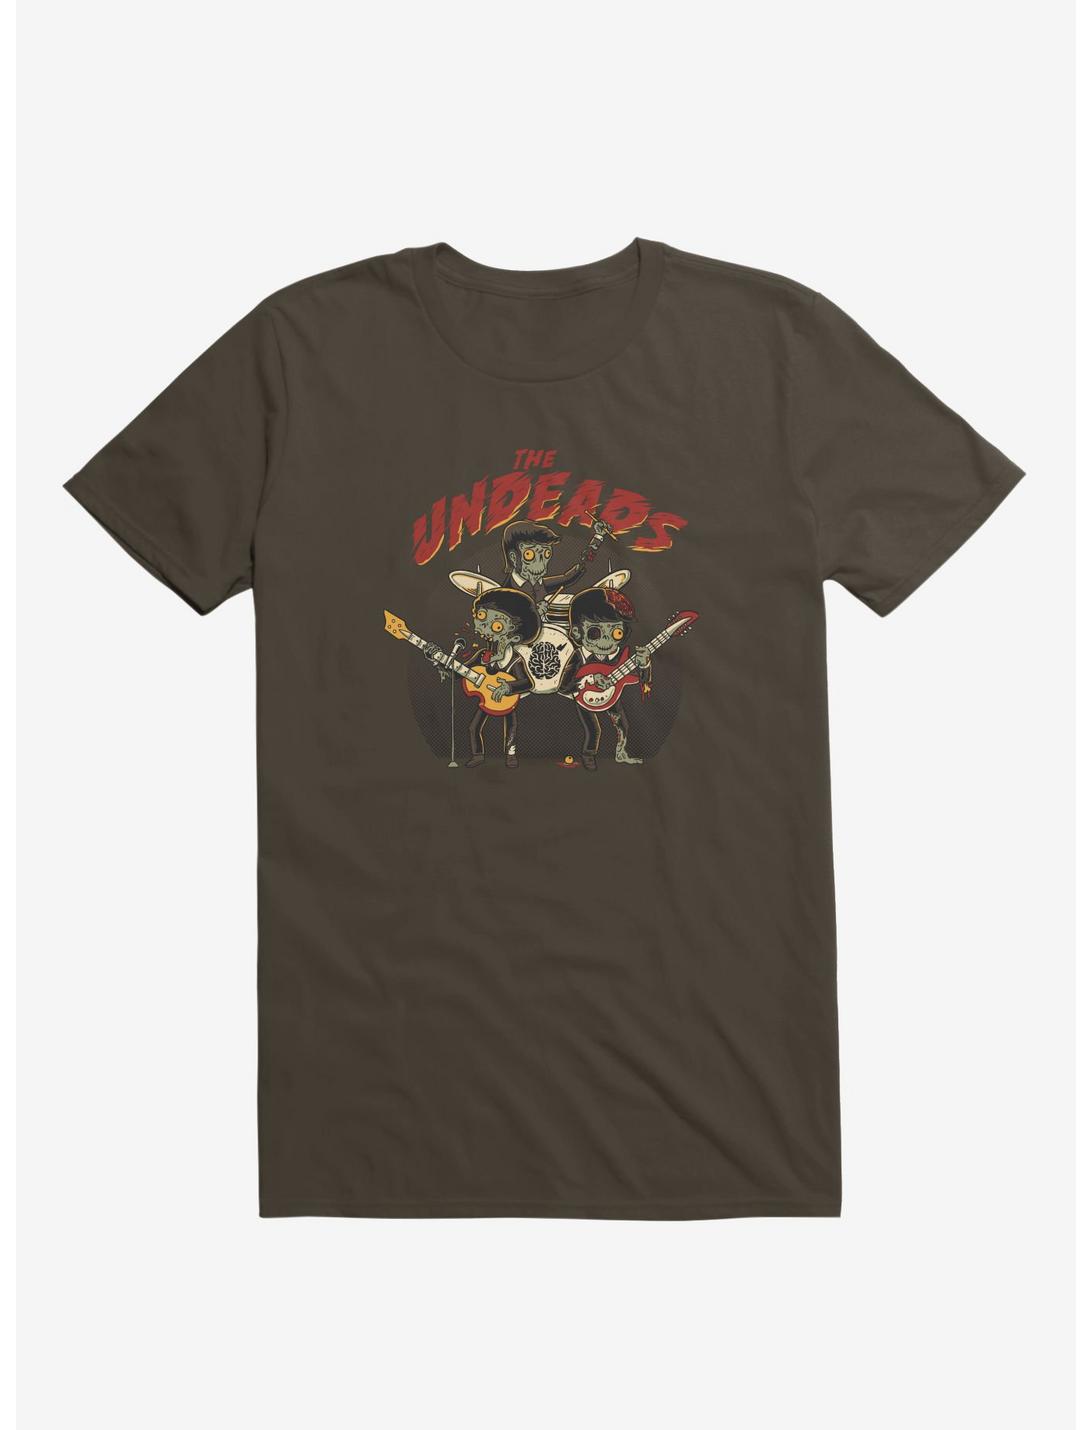 The Undeads T-Shirt, BROWN, hi-res